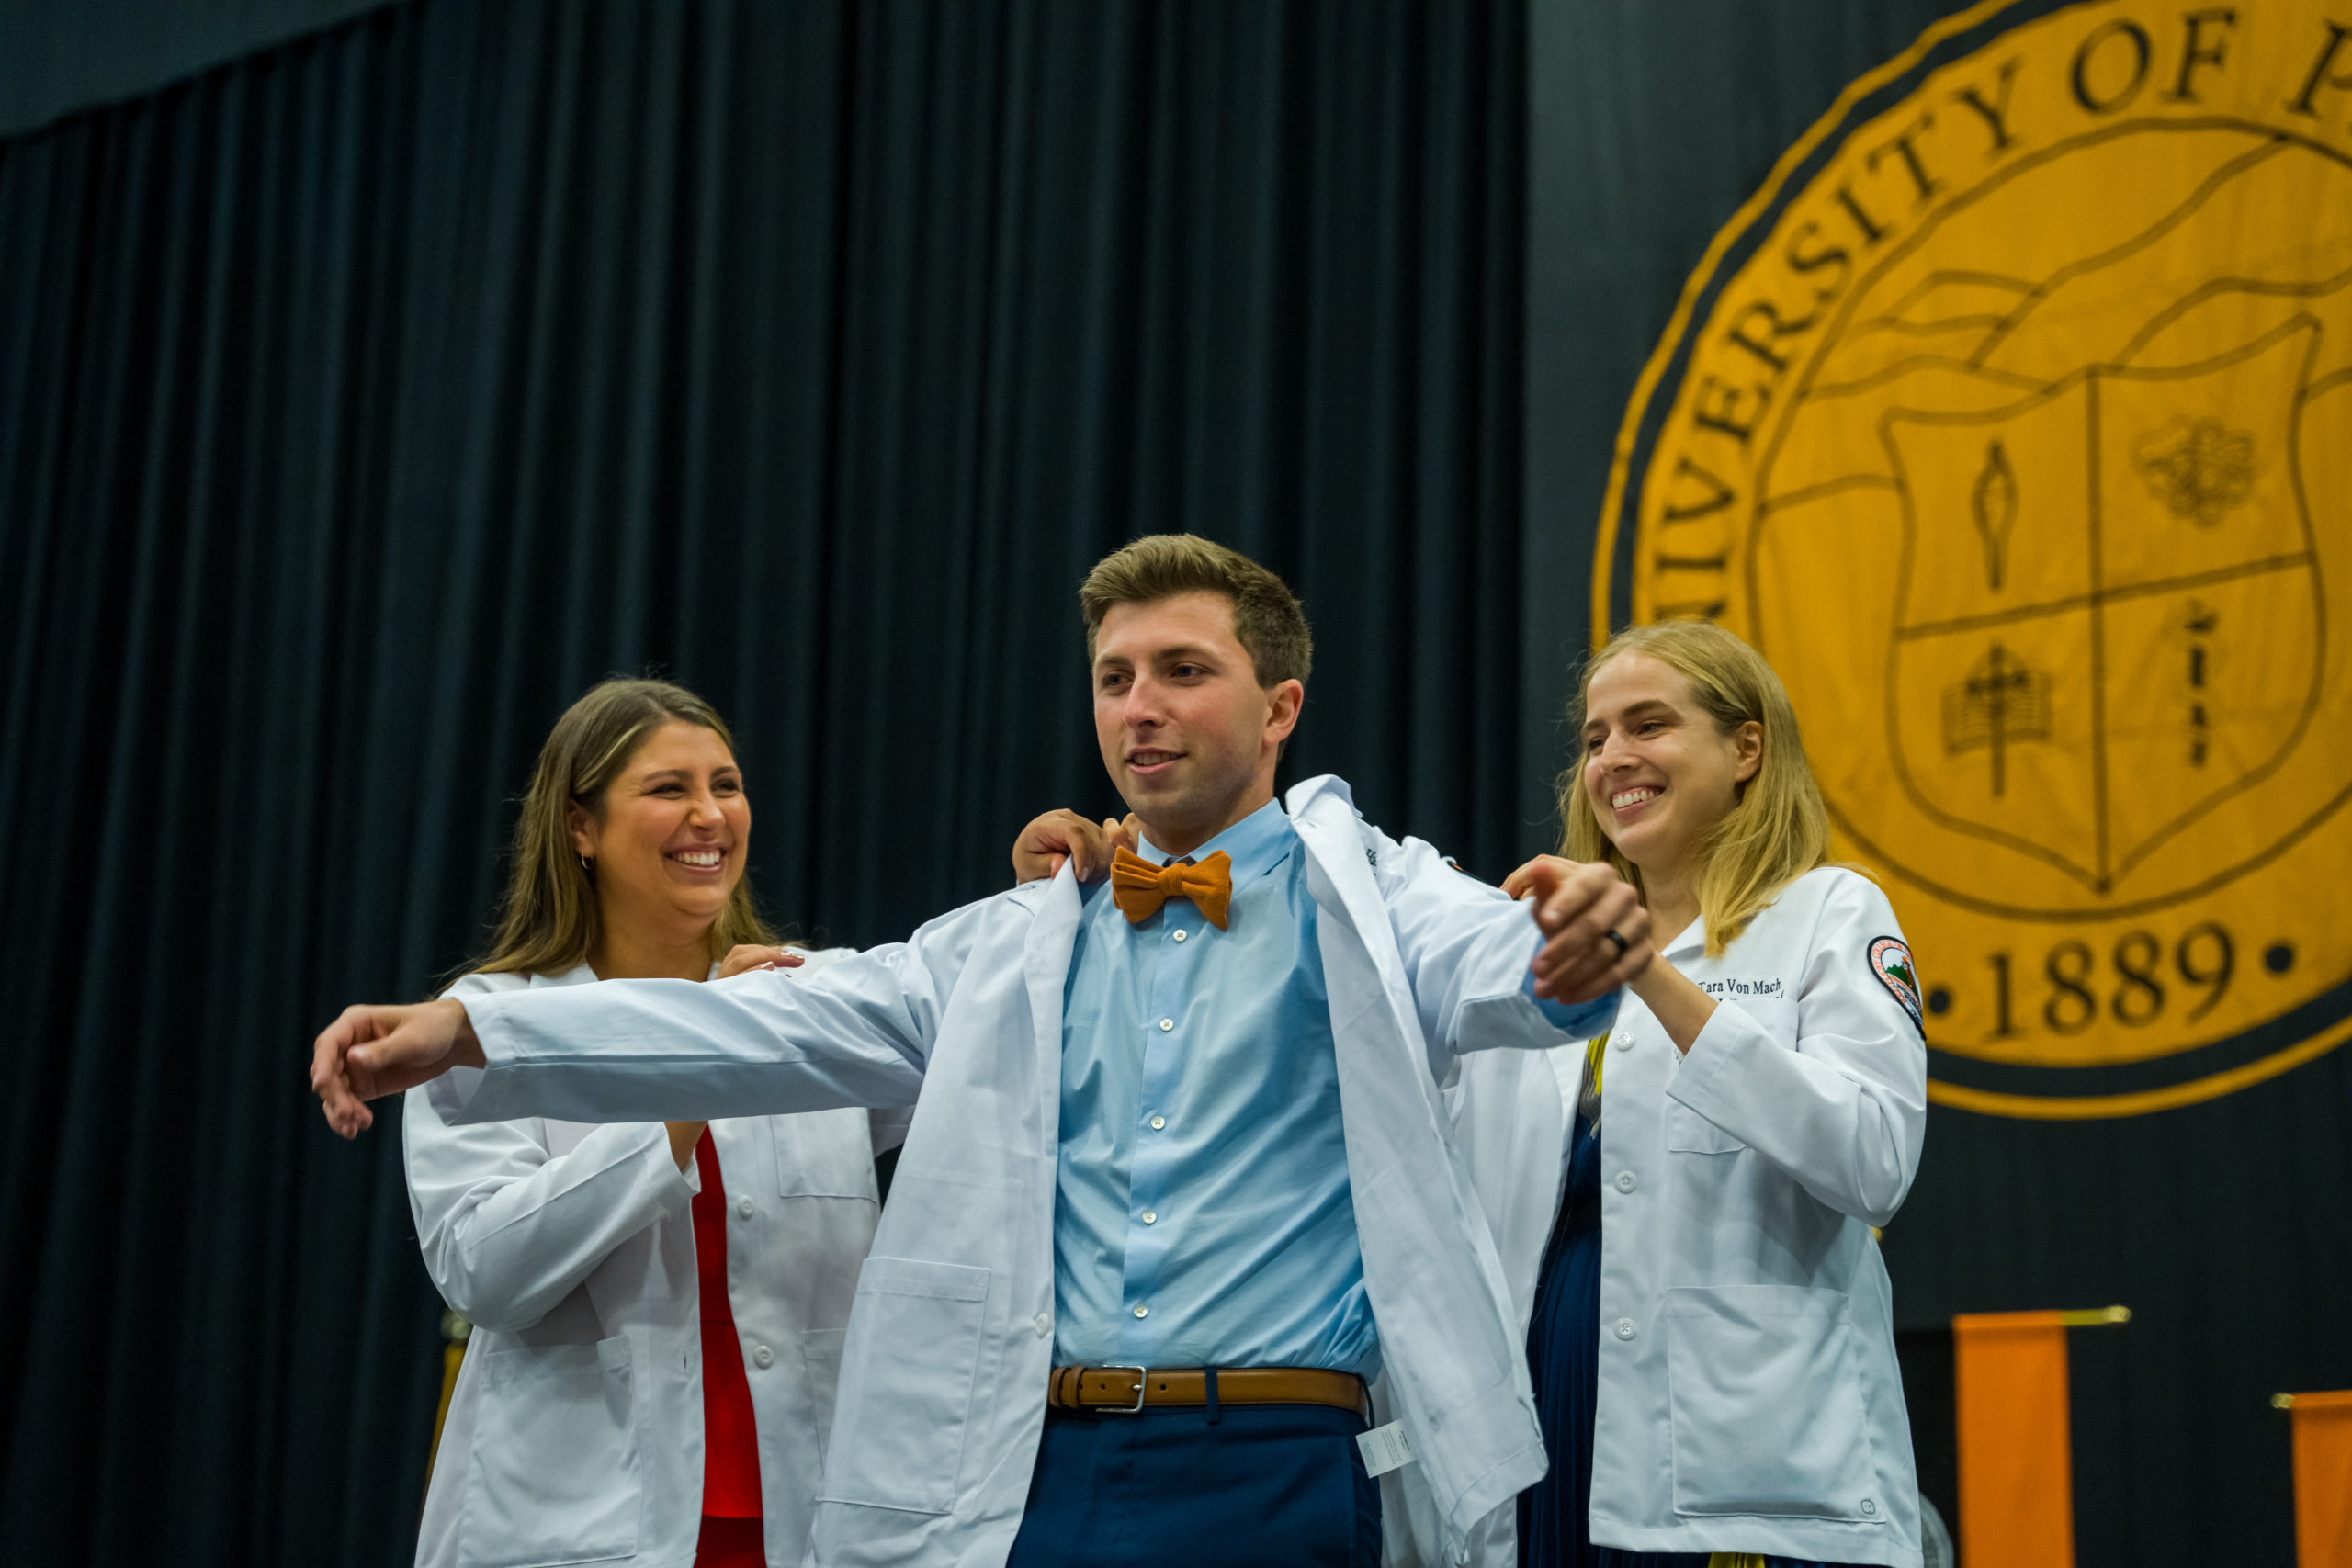 Next generation of physicians celebrated at White Coat Ceremony